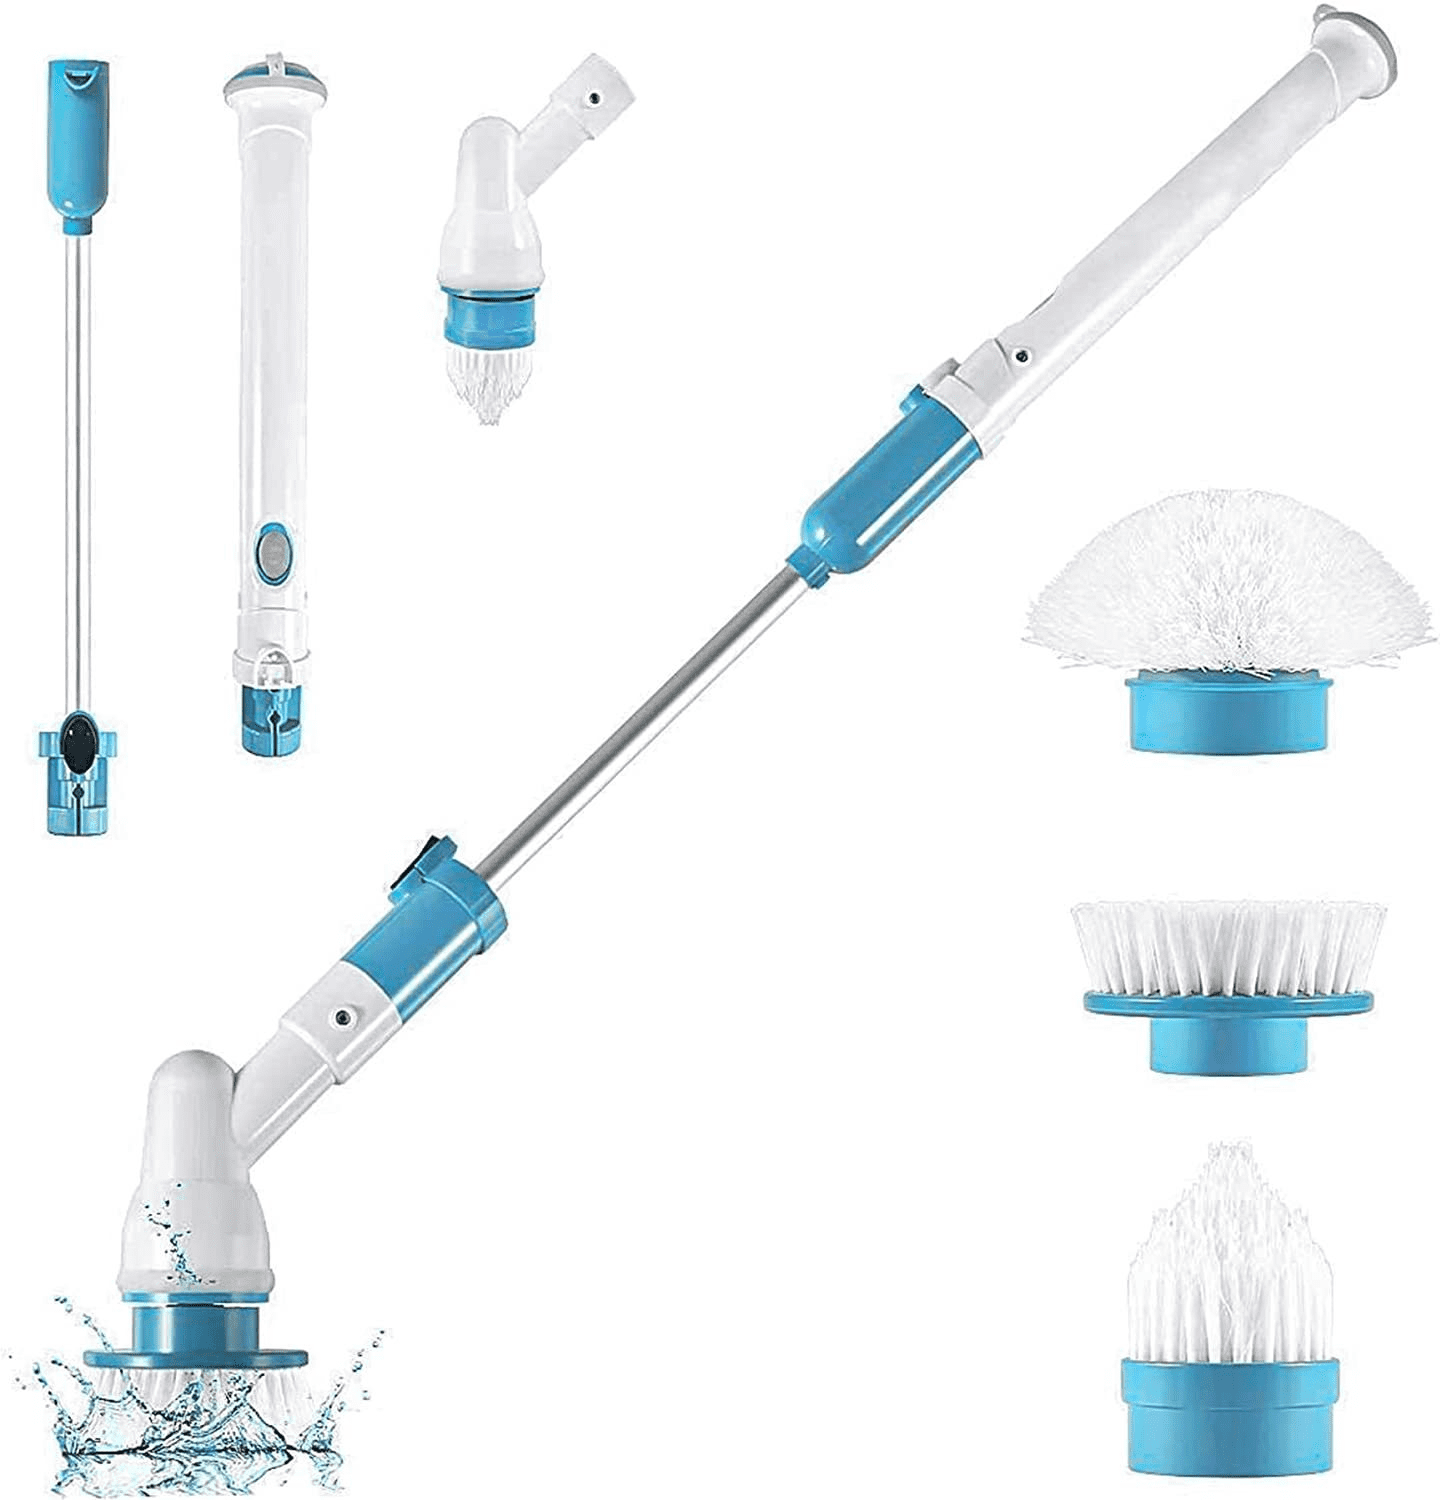 Drill Brush Attachment Set Power Scrubber Brush Cleaning Kit for Grout  Tiles Sinks Car Bathtub Bathroom and Kitchen Surface 3 Pack